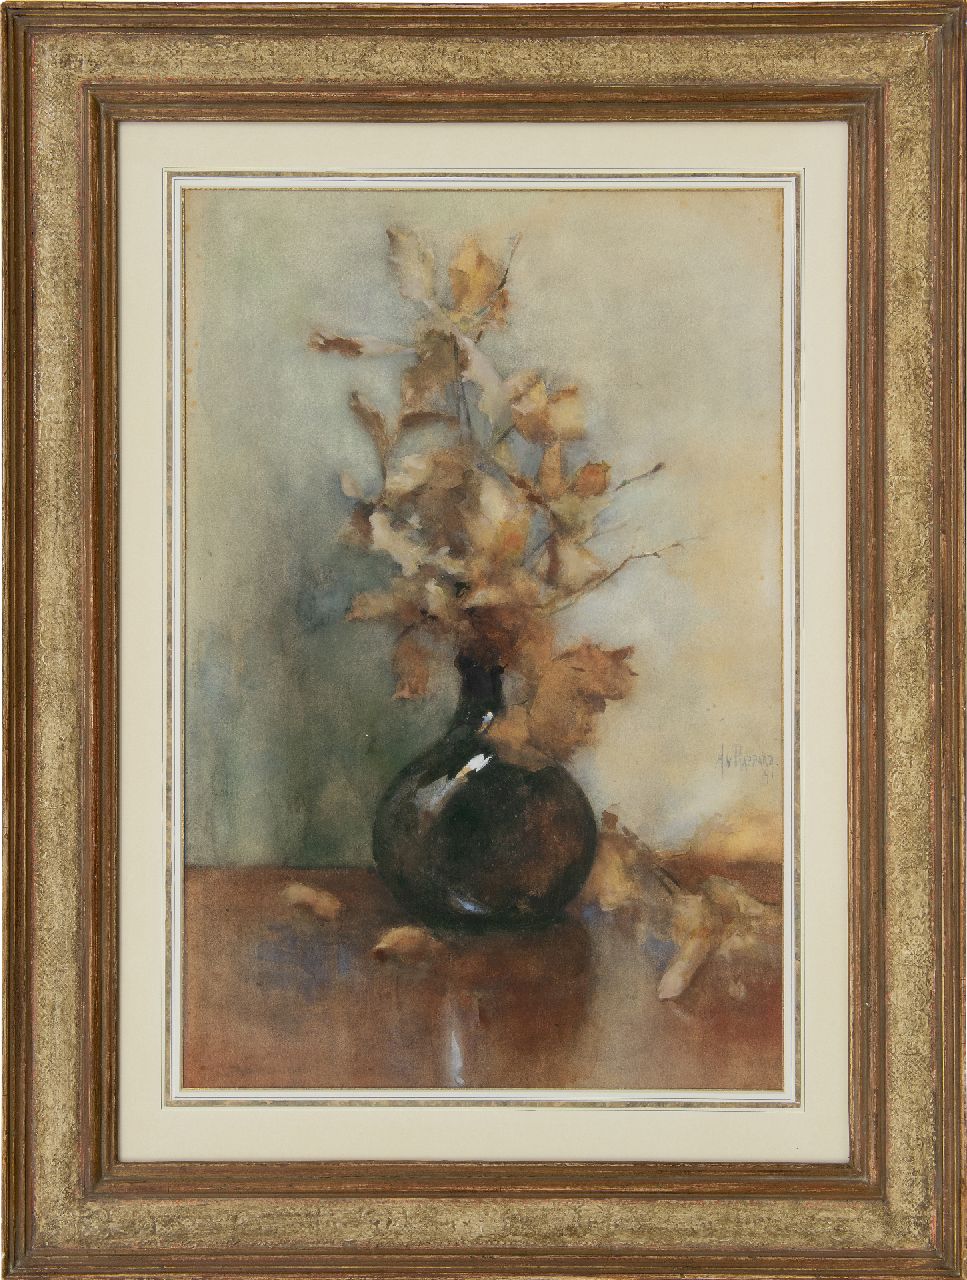 Rappard A.G.A. van | 'Anthon' Gerhard Alexander van Rappard | Watercolours and drawings offered for sale | Autumn still life, watercolour on paper 65.5 x 43.0 cm, signed m.r. and dated '91